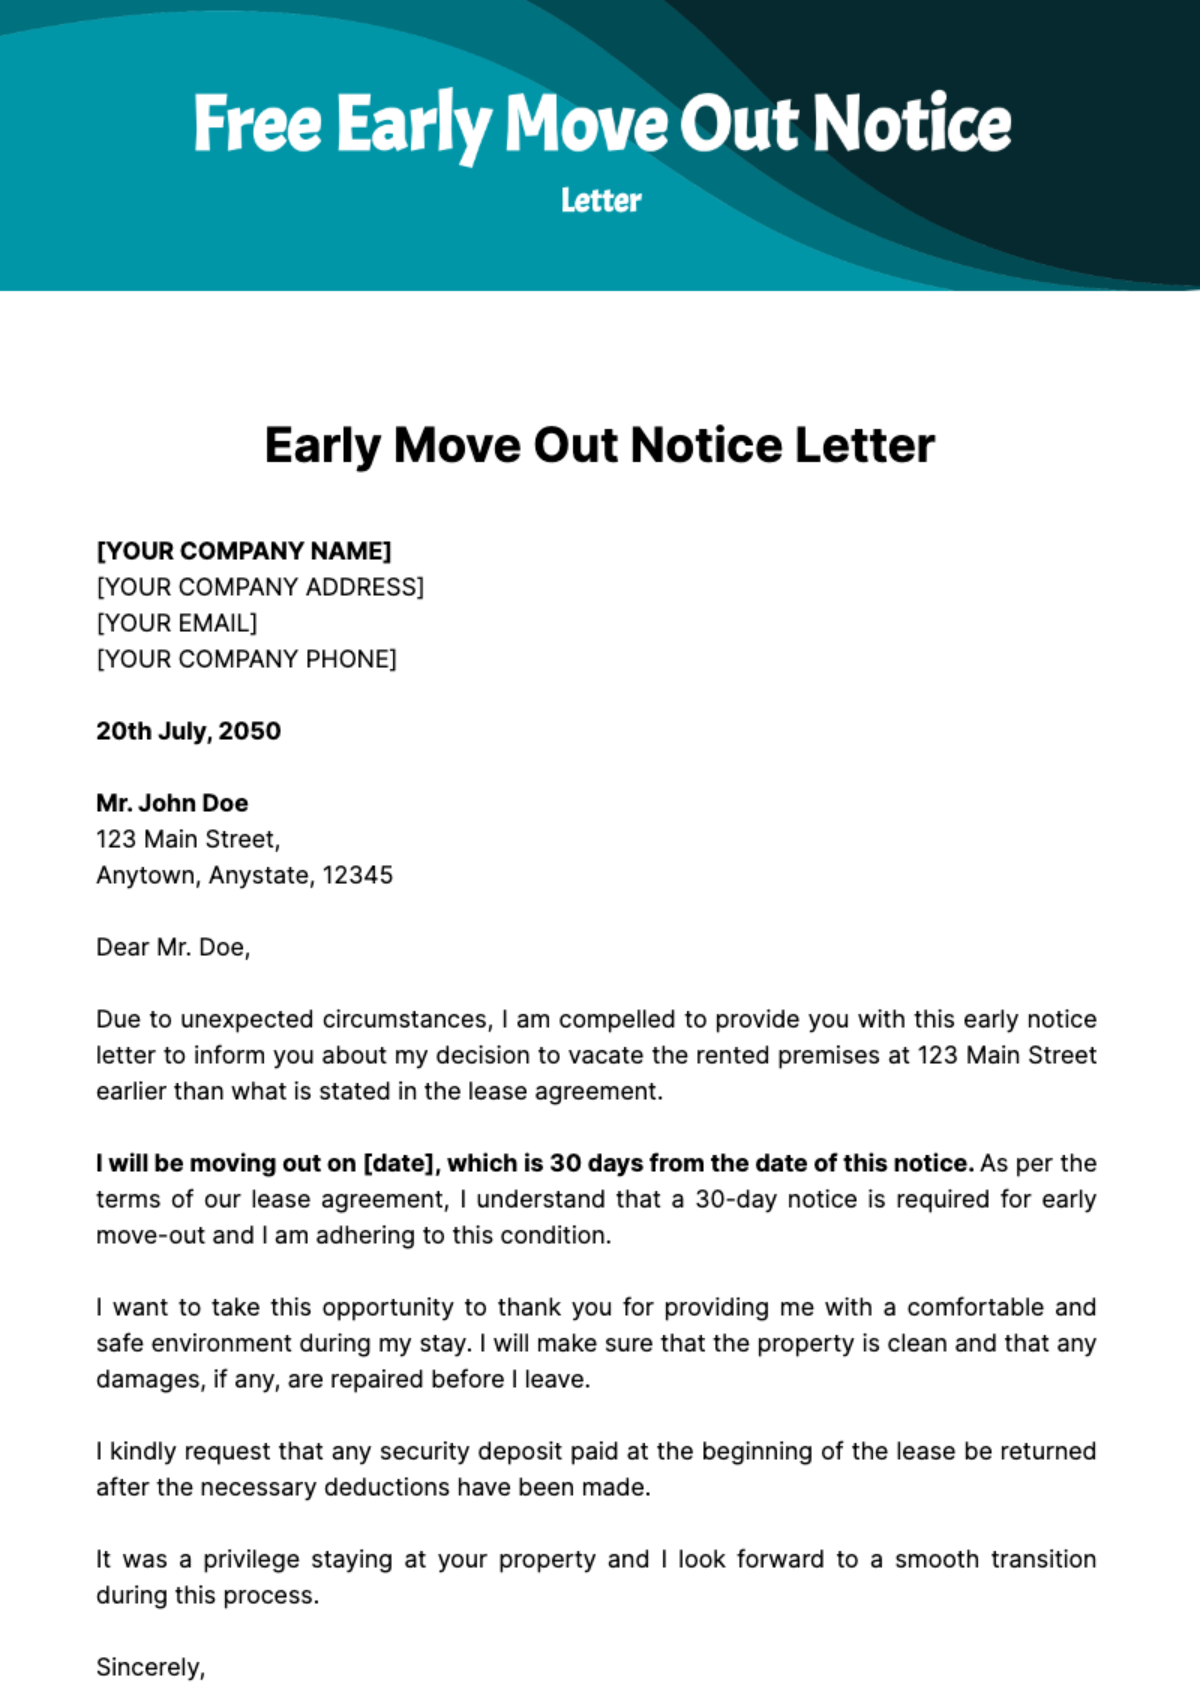 Free Early Move Out Notice Letter Template